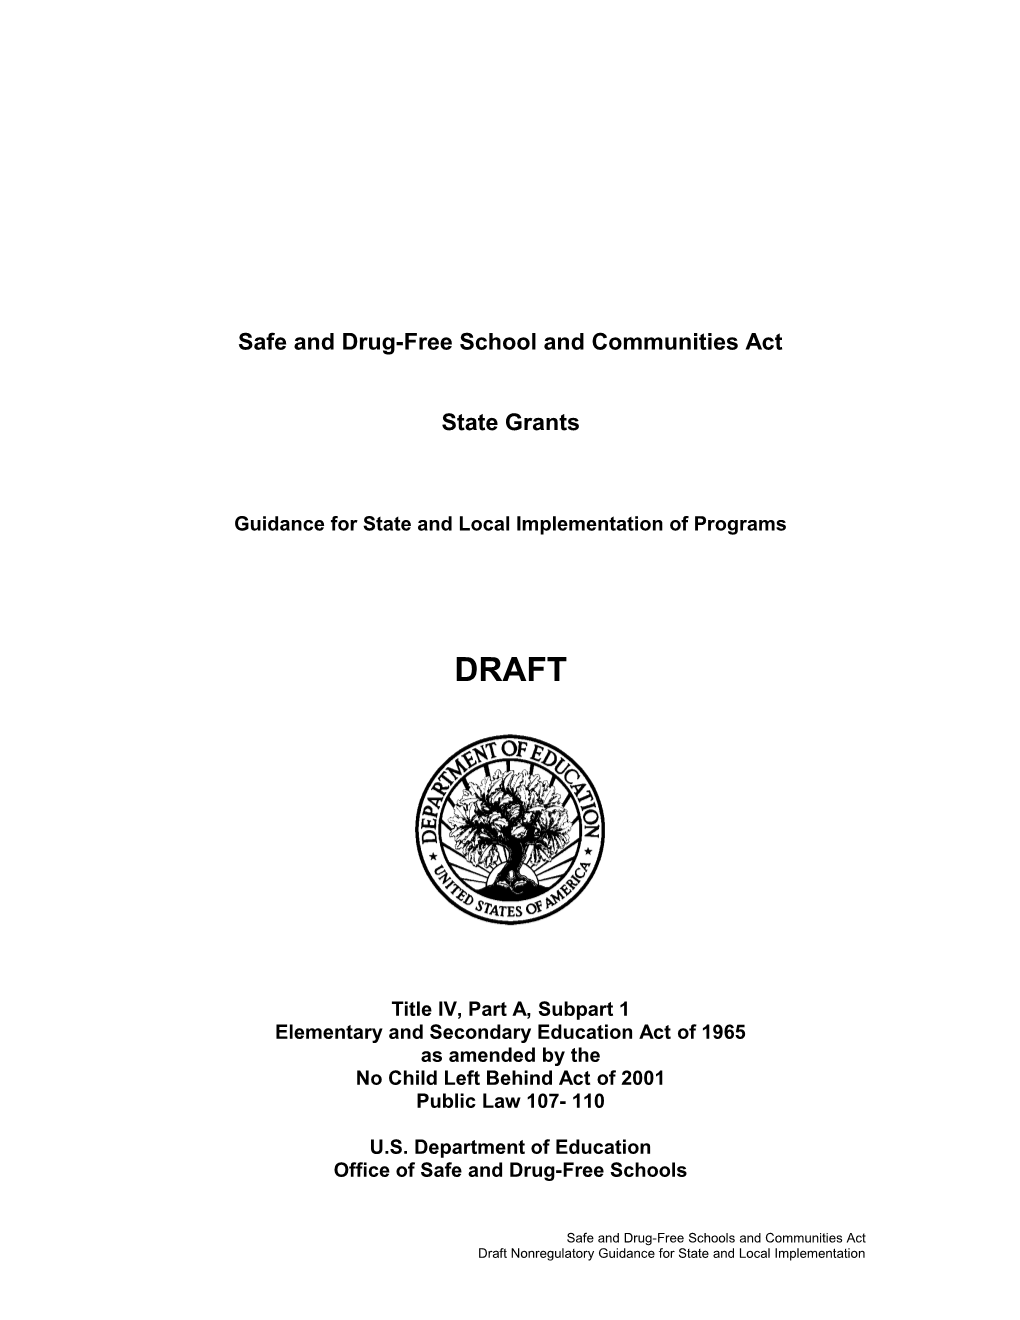 Safe and Drug-Free School and Communities Act (MS WORD)